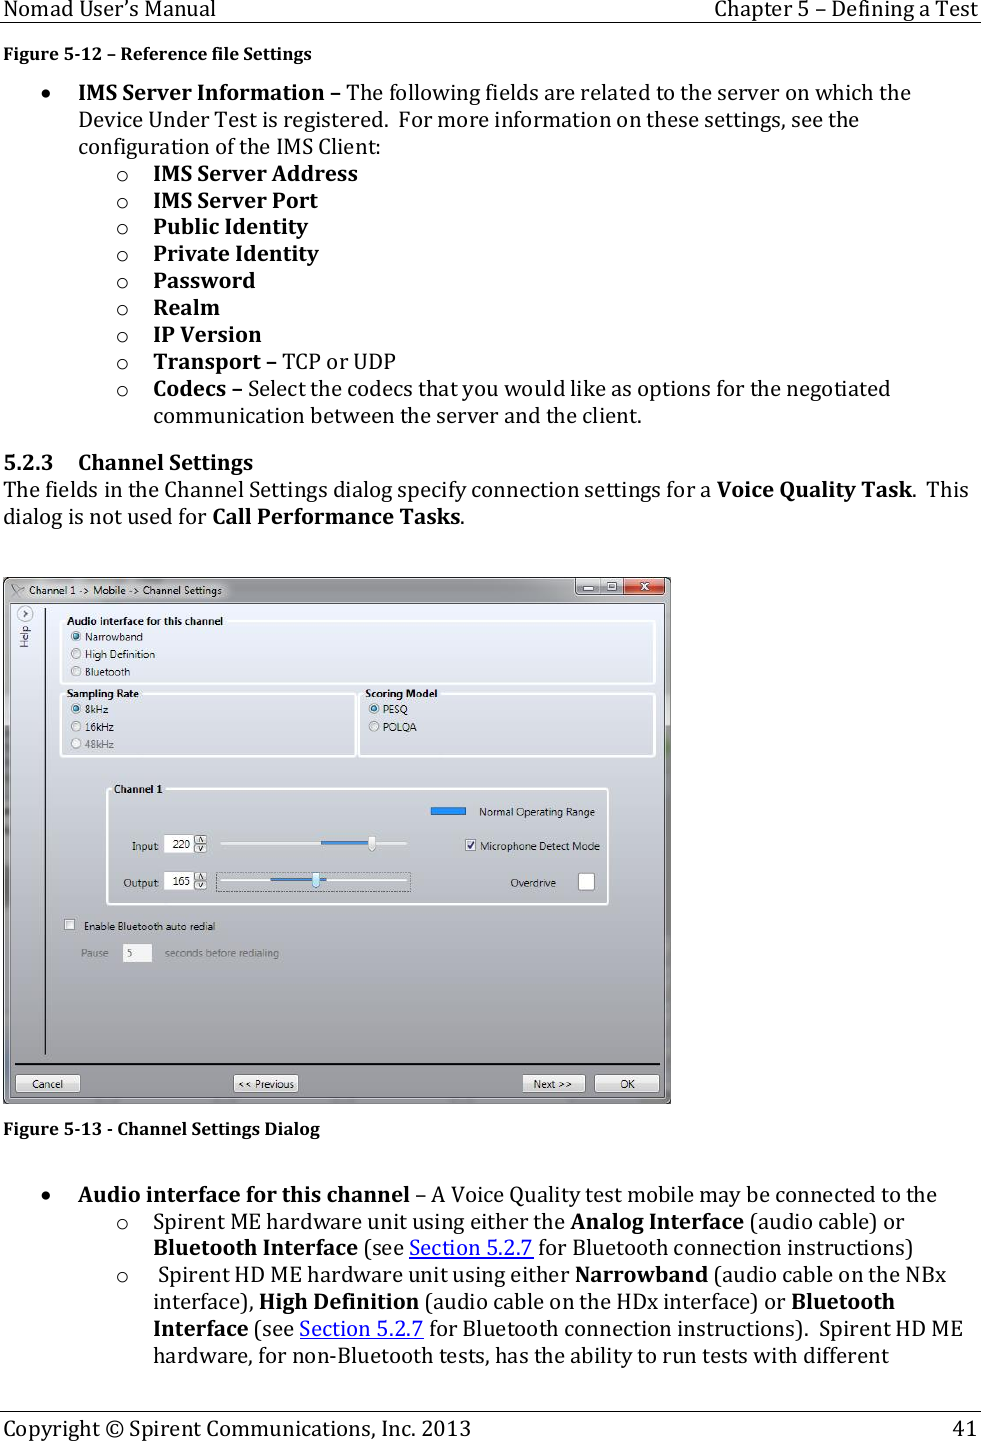  Nomad User’s Manual  Chapter 5 – Defining a Test Copyright © Spirent Communications, Inc. 2013    41  Figure 5-12 – Reference file Settings  IMS Server Information – The following fields are related to the server on which the Device Under Test is registered.  For more information on these settings, see the configuration of the IMS Client: o IMS Server Address o IMS Server Port o Public Identity o Private Identity o Password o Realm o IP Version o Transport – TCP or UDP o Codecs – Select the codecs that you would like as options for the negotiated communication between the server and the client. 5.2.3 Channel Settings The fields in the Channel Settings dialog specify connection settings for a Voice Quality Task.  This dialog is not used for Call Performance Tasks.   Figure 5-13 - Channel Settings Dialog   Audio interface for this channel – A Voice Quality test mobile may be connected to the  o Spirent ME hardware unit using either the Analog Interface (audio cable) or Bluetooth Interface (see Section 5.2.7 for Bluetooth connection instructions) o  Spirent HD ME hardware unit using either Narrowband (audio cable on the NBx interface), High Definition (audio cable on the HDx interface) or Bluetooth Interface (see Section 5.2.7 for Bluetooth connection instructions).  Spirent HD ME hardware, for non-Bluetooth tests, has the ability to run tests with different 